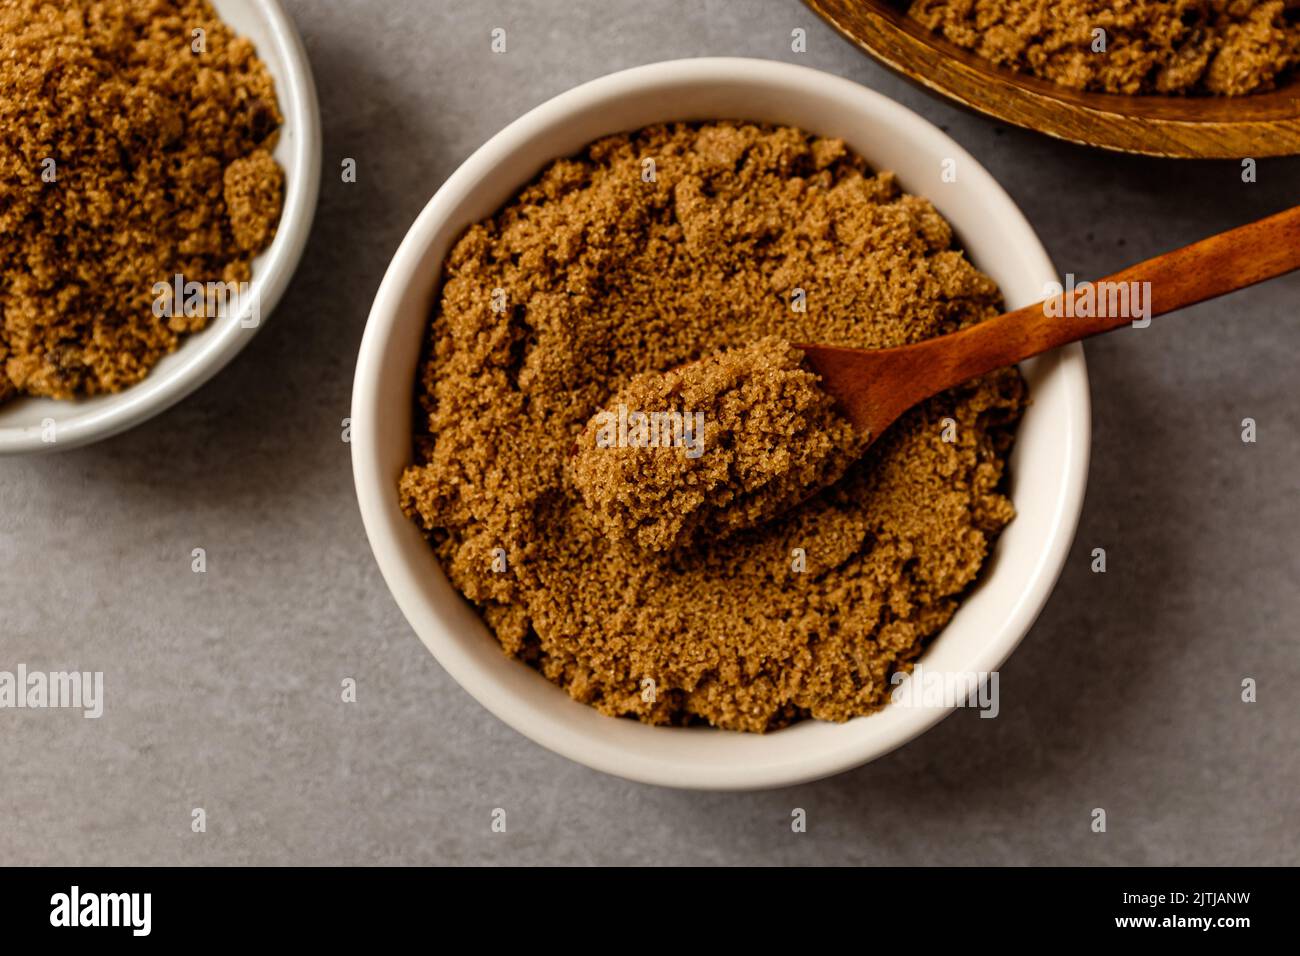 unrefined sugar. food made from sugarcane. sweet food Stock Photo